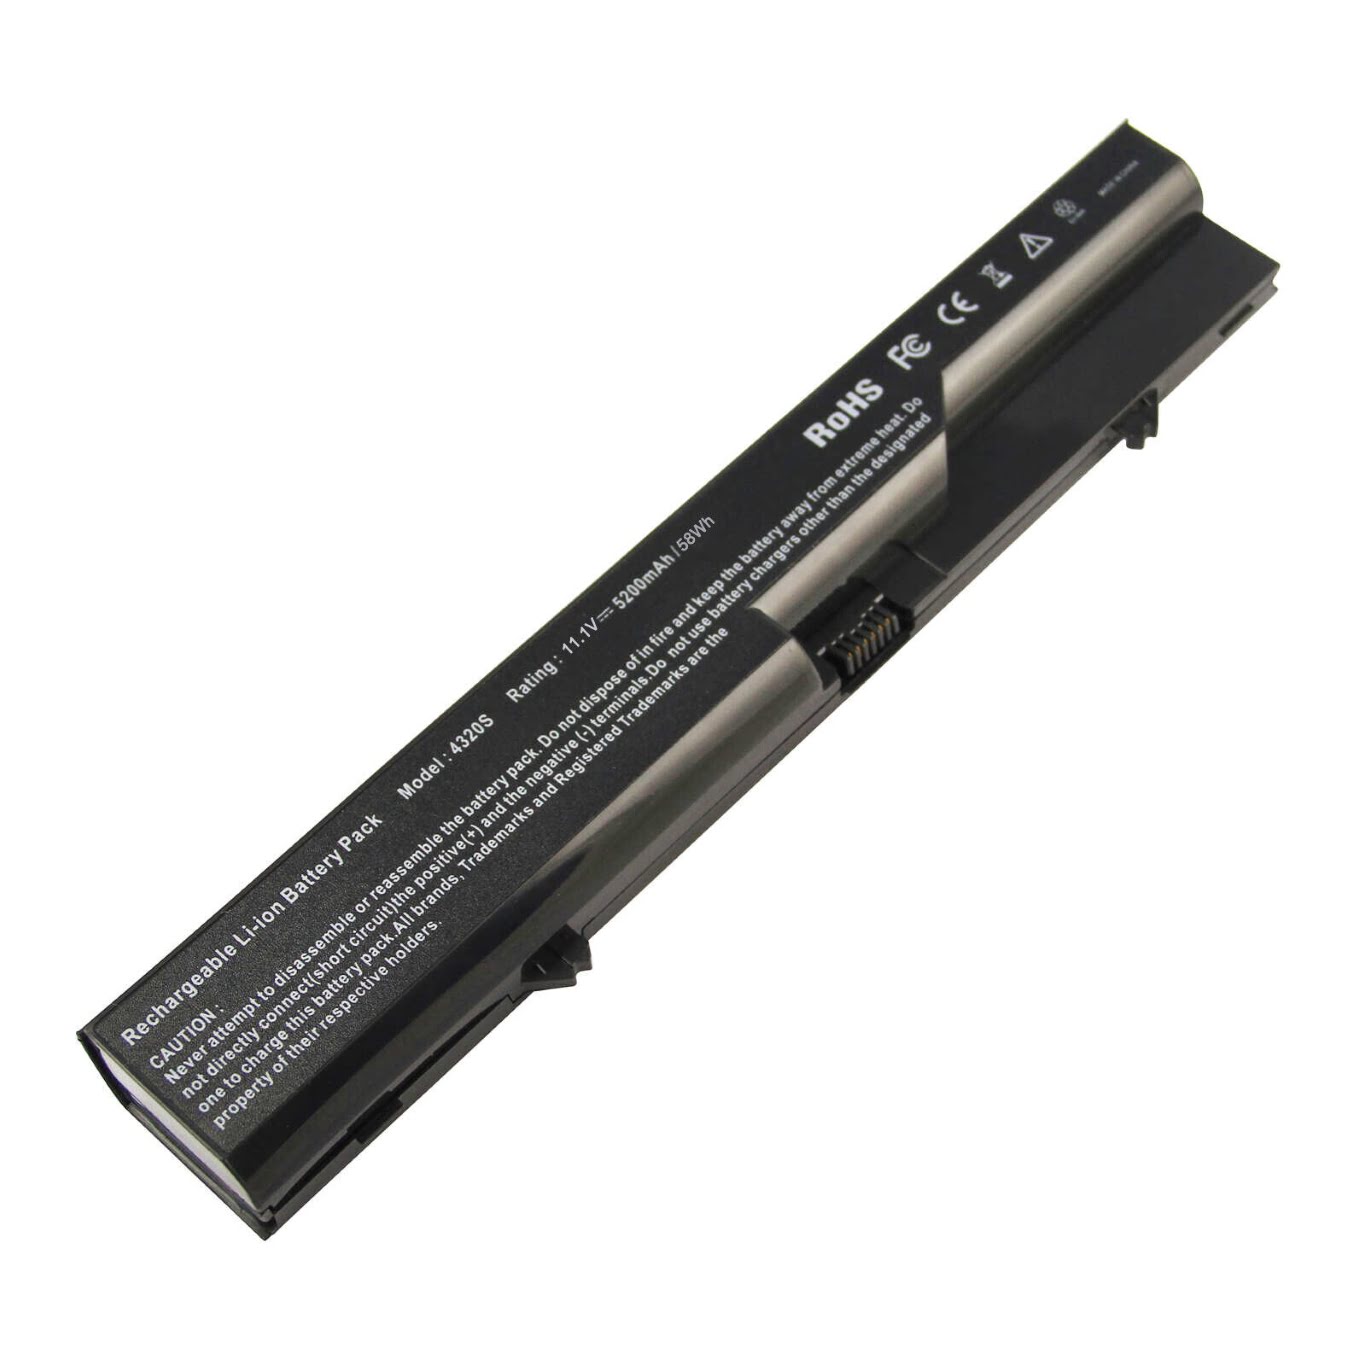 587706-121, 587706-131 replacement Laptop Battery for HP 320, 321, 11.1 V, 6 cells, 5200 Mah